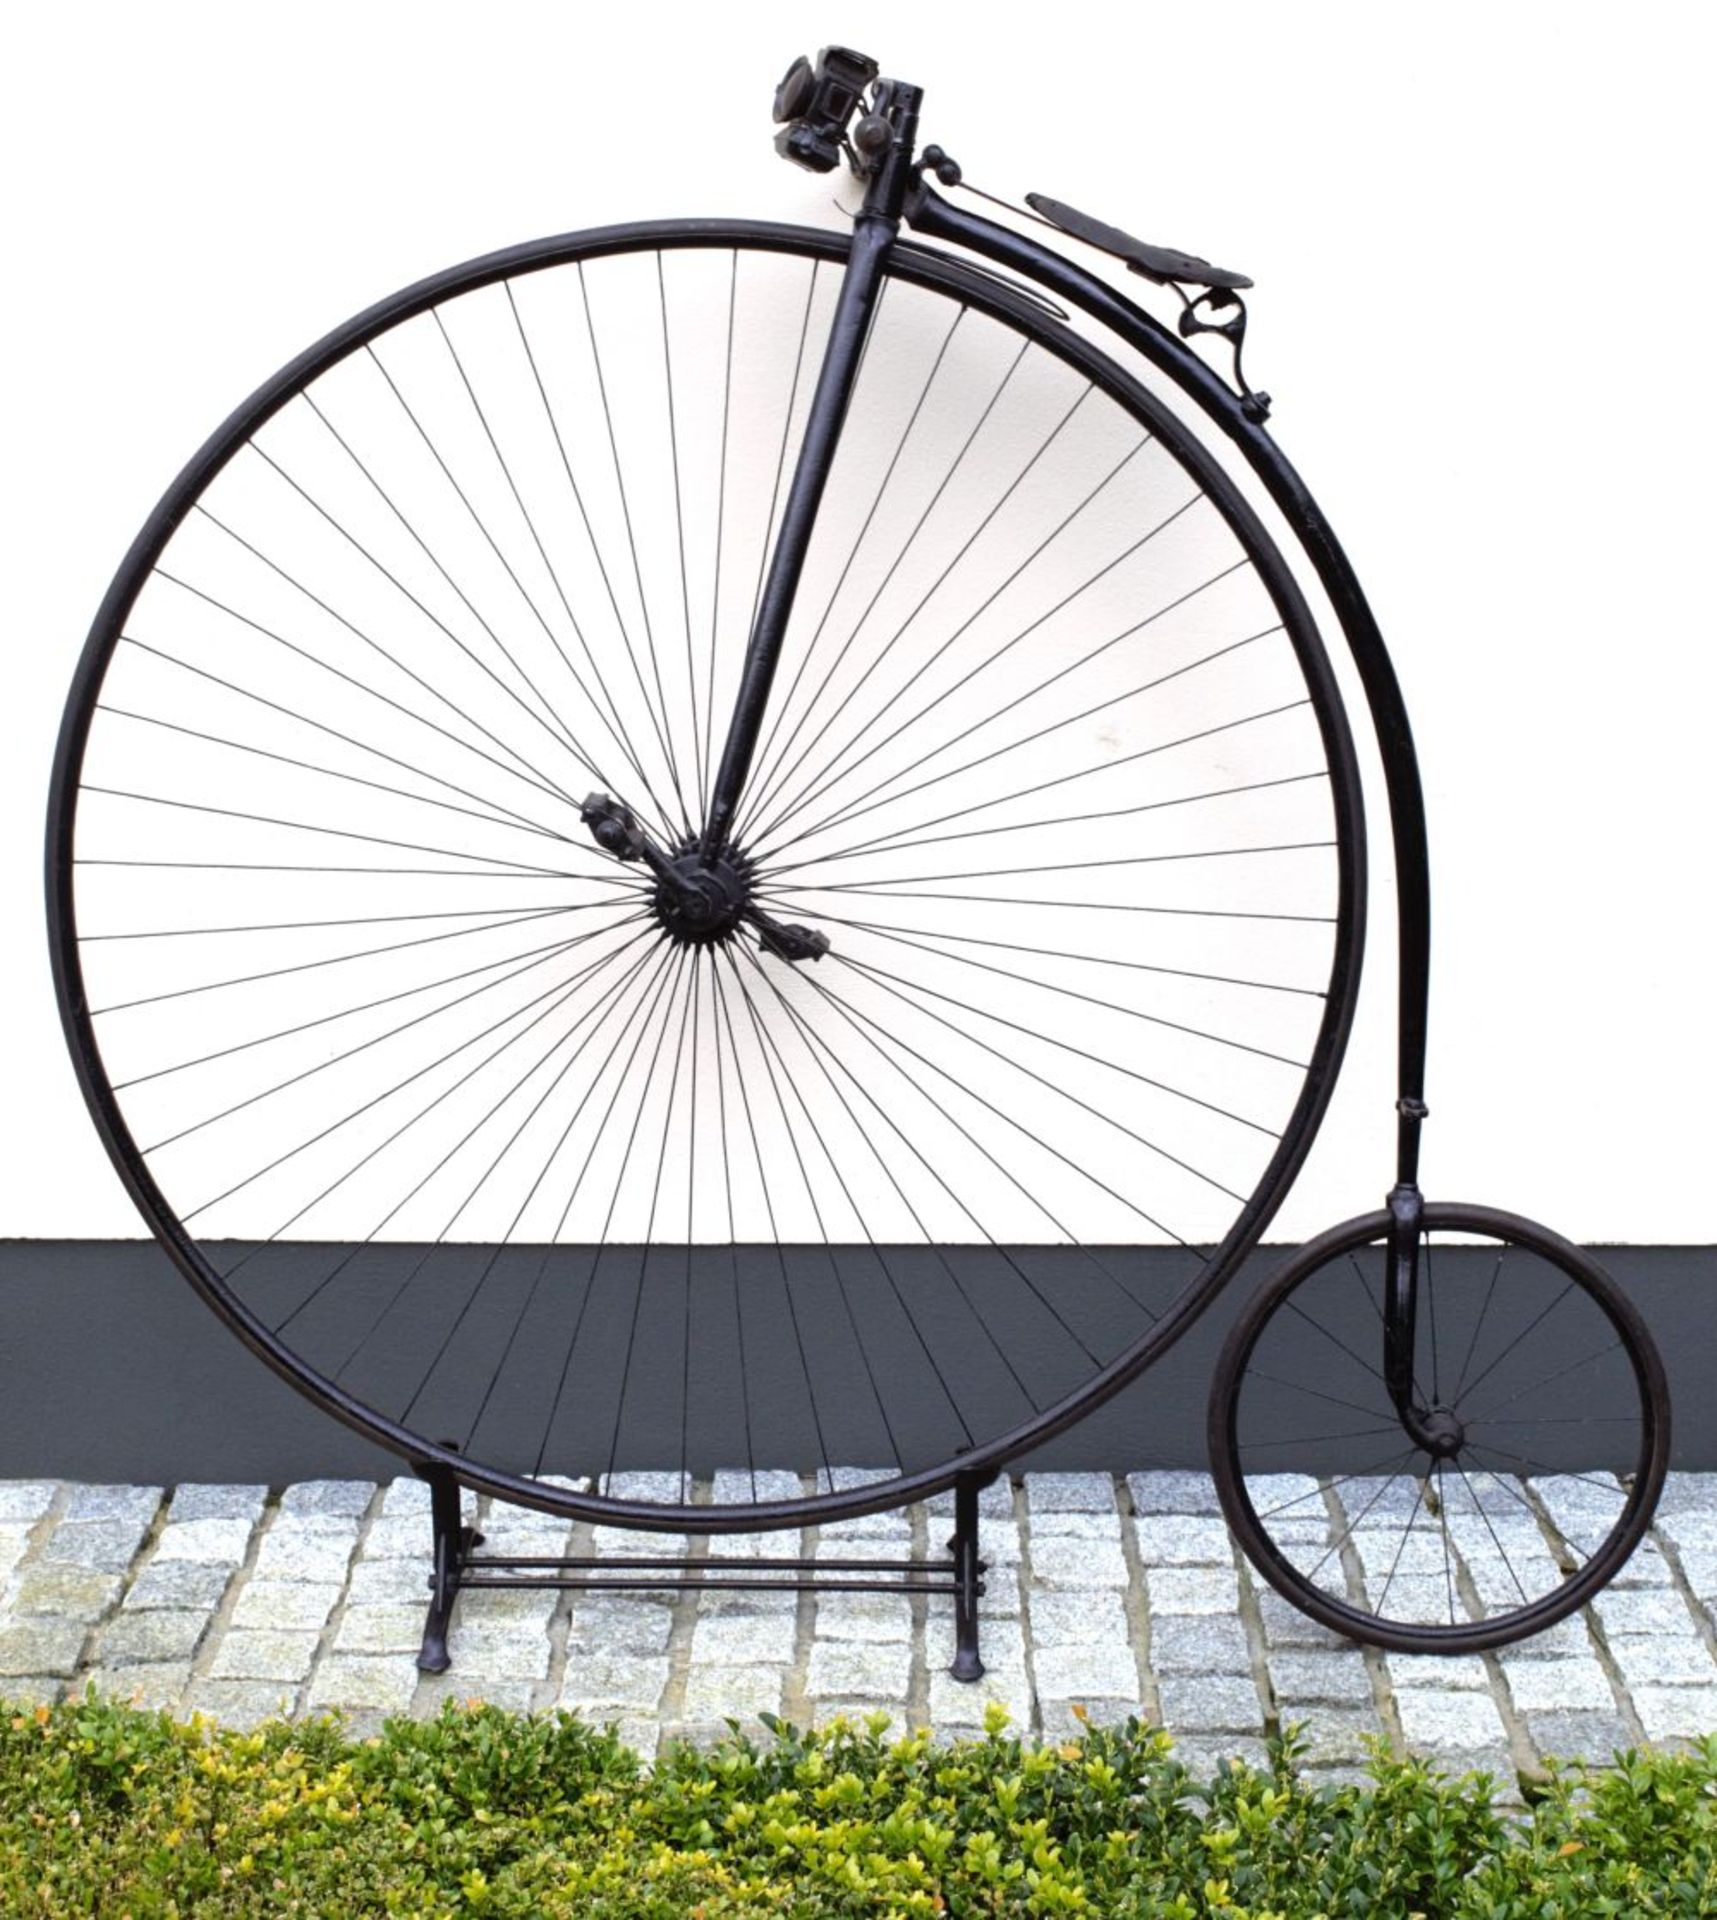 AN 'ORDINARY' BICYCLE (PENNY FARTHING)